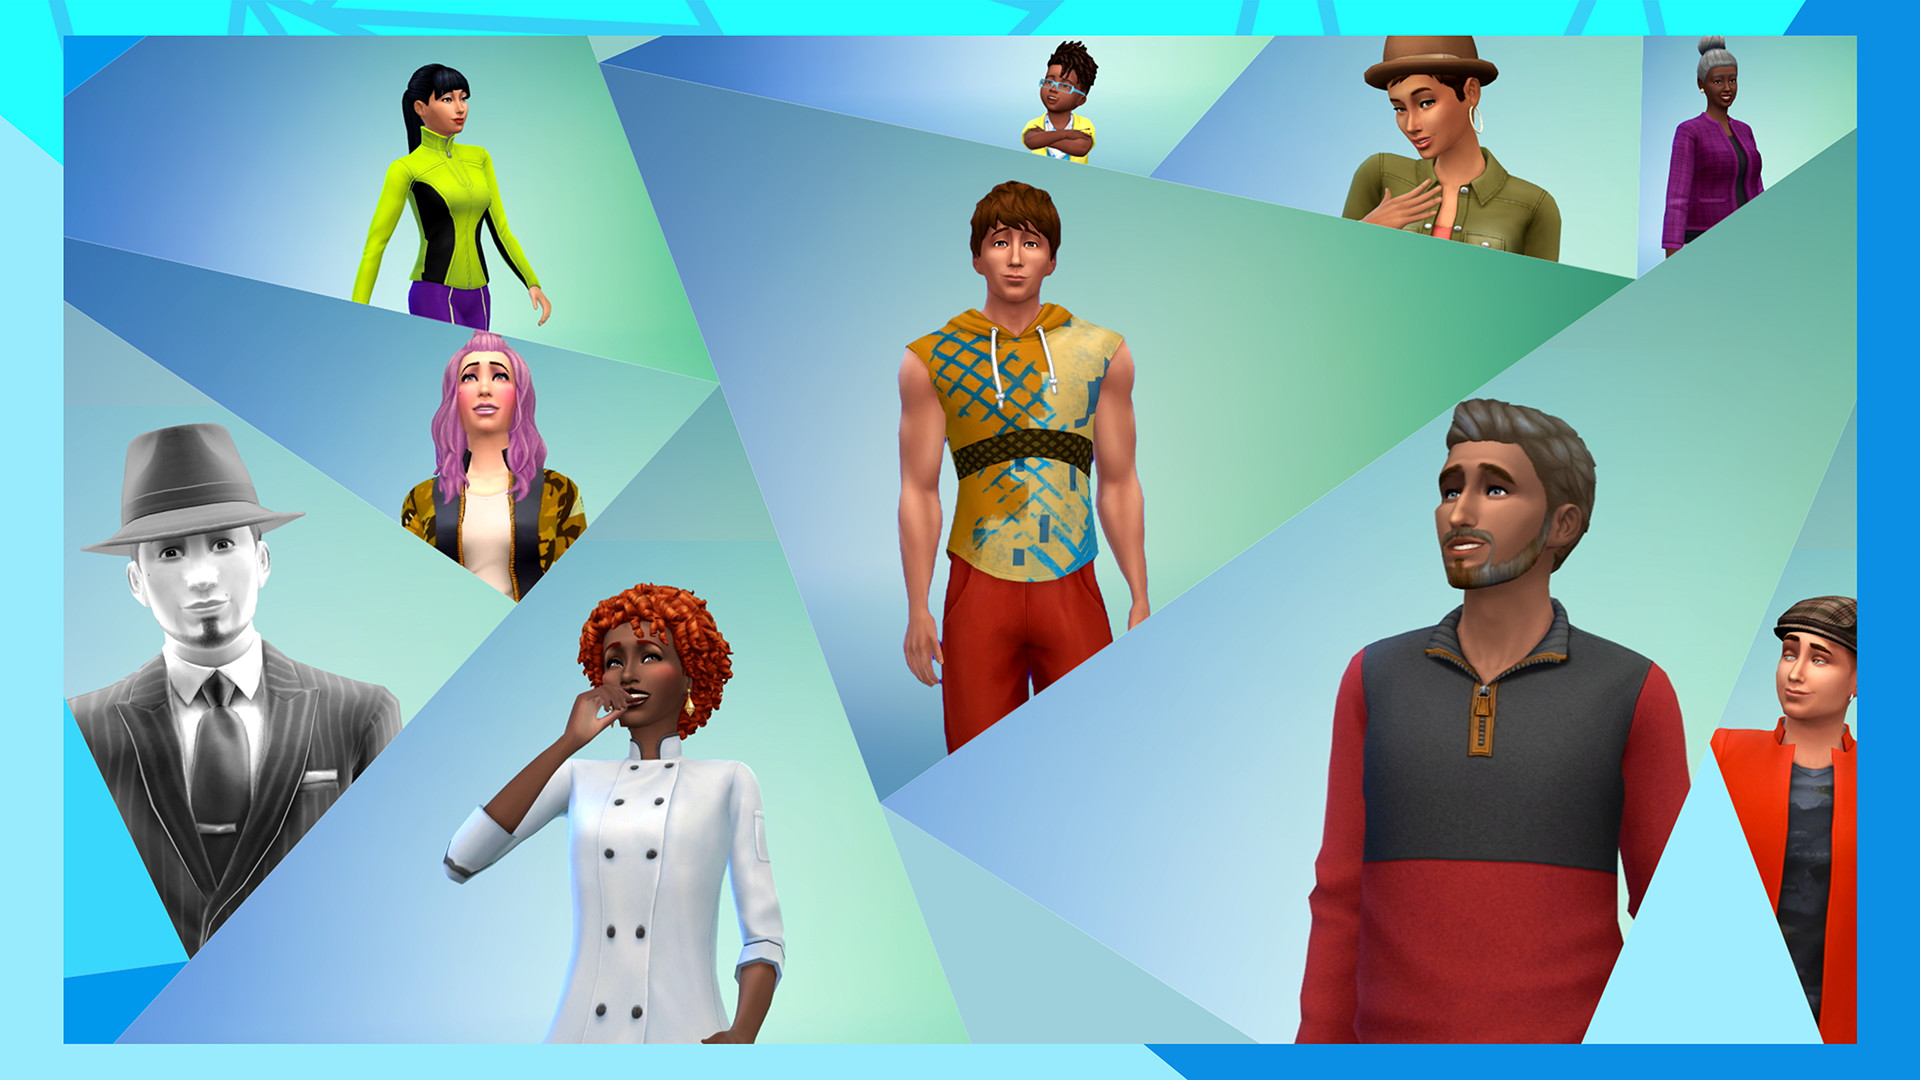 Download The Sims 4 Deluxe edition Completo v1.101 + 71 DLCs + Crack